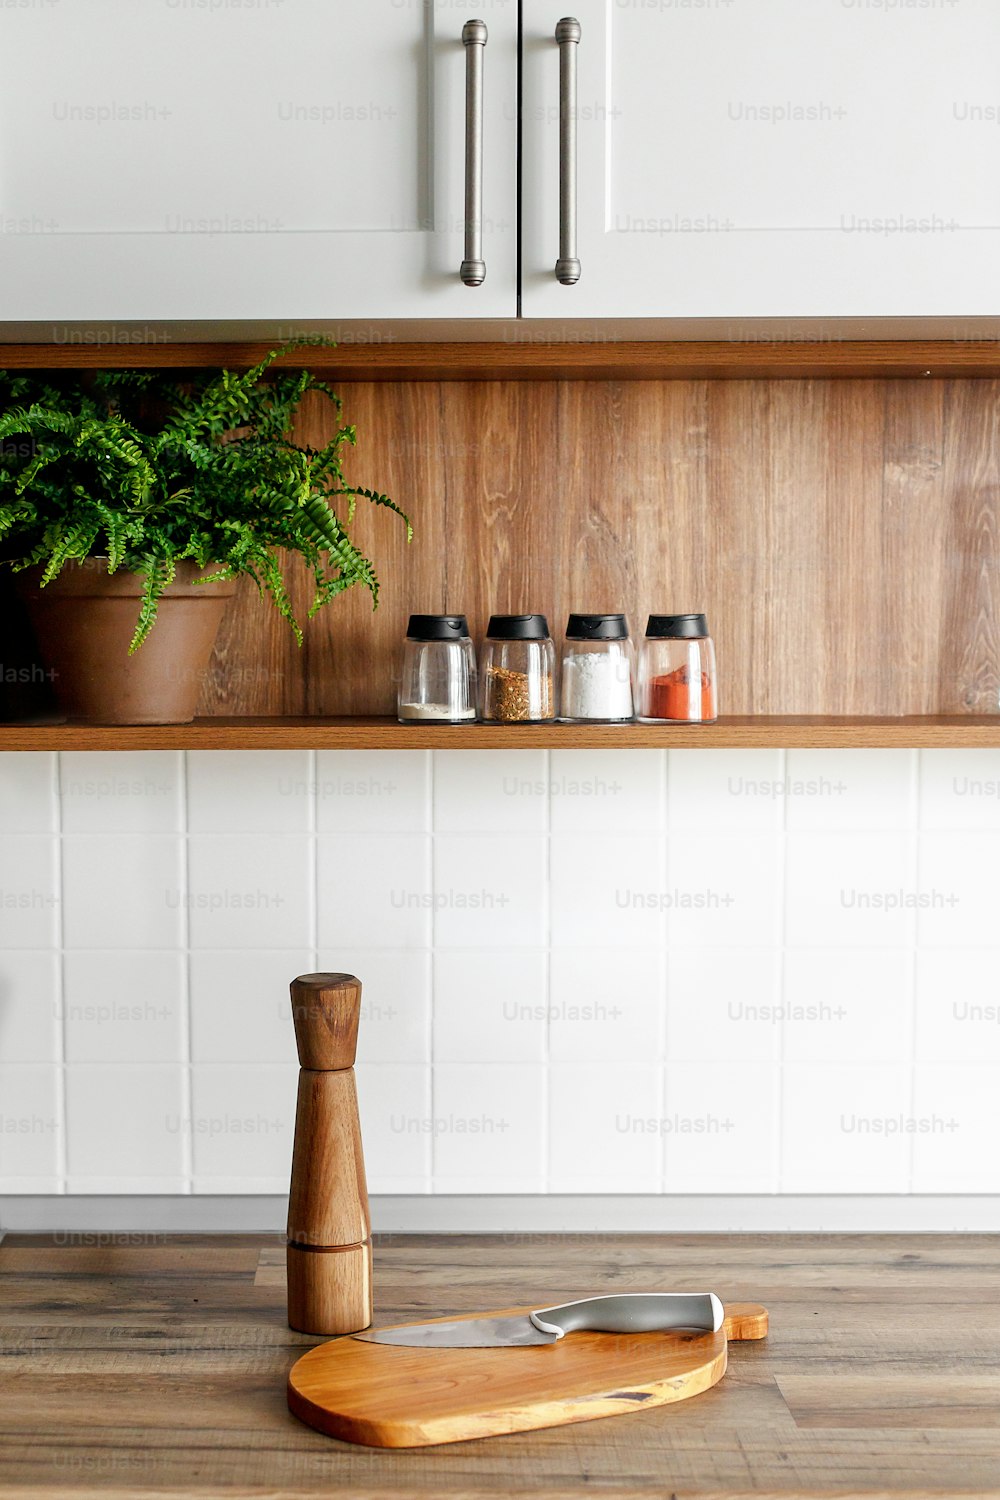 wooden board with pepper mill and knife on modern kitchen countertop and shelves with food ingredients and spices in glass jars. Stylish gray kitchen interior  design in scandinavian style